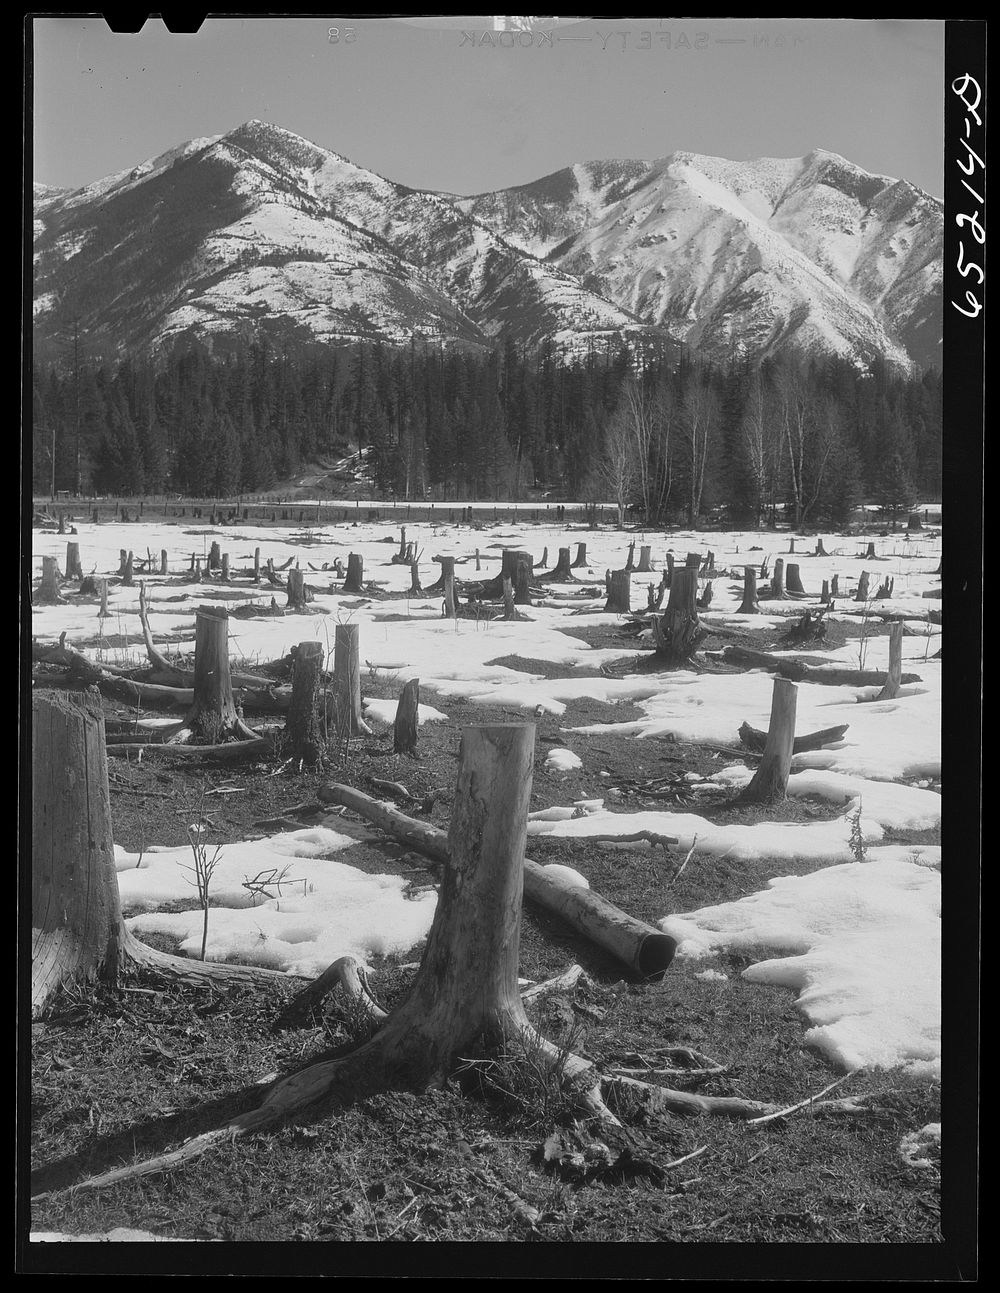 Flathead Valley special area project, Montana. Uncleared land, typical of Flathead Valley, where farmers from the drought…